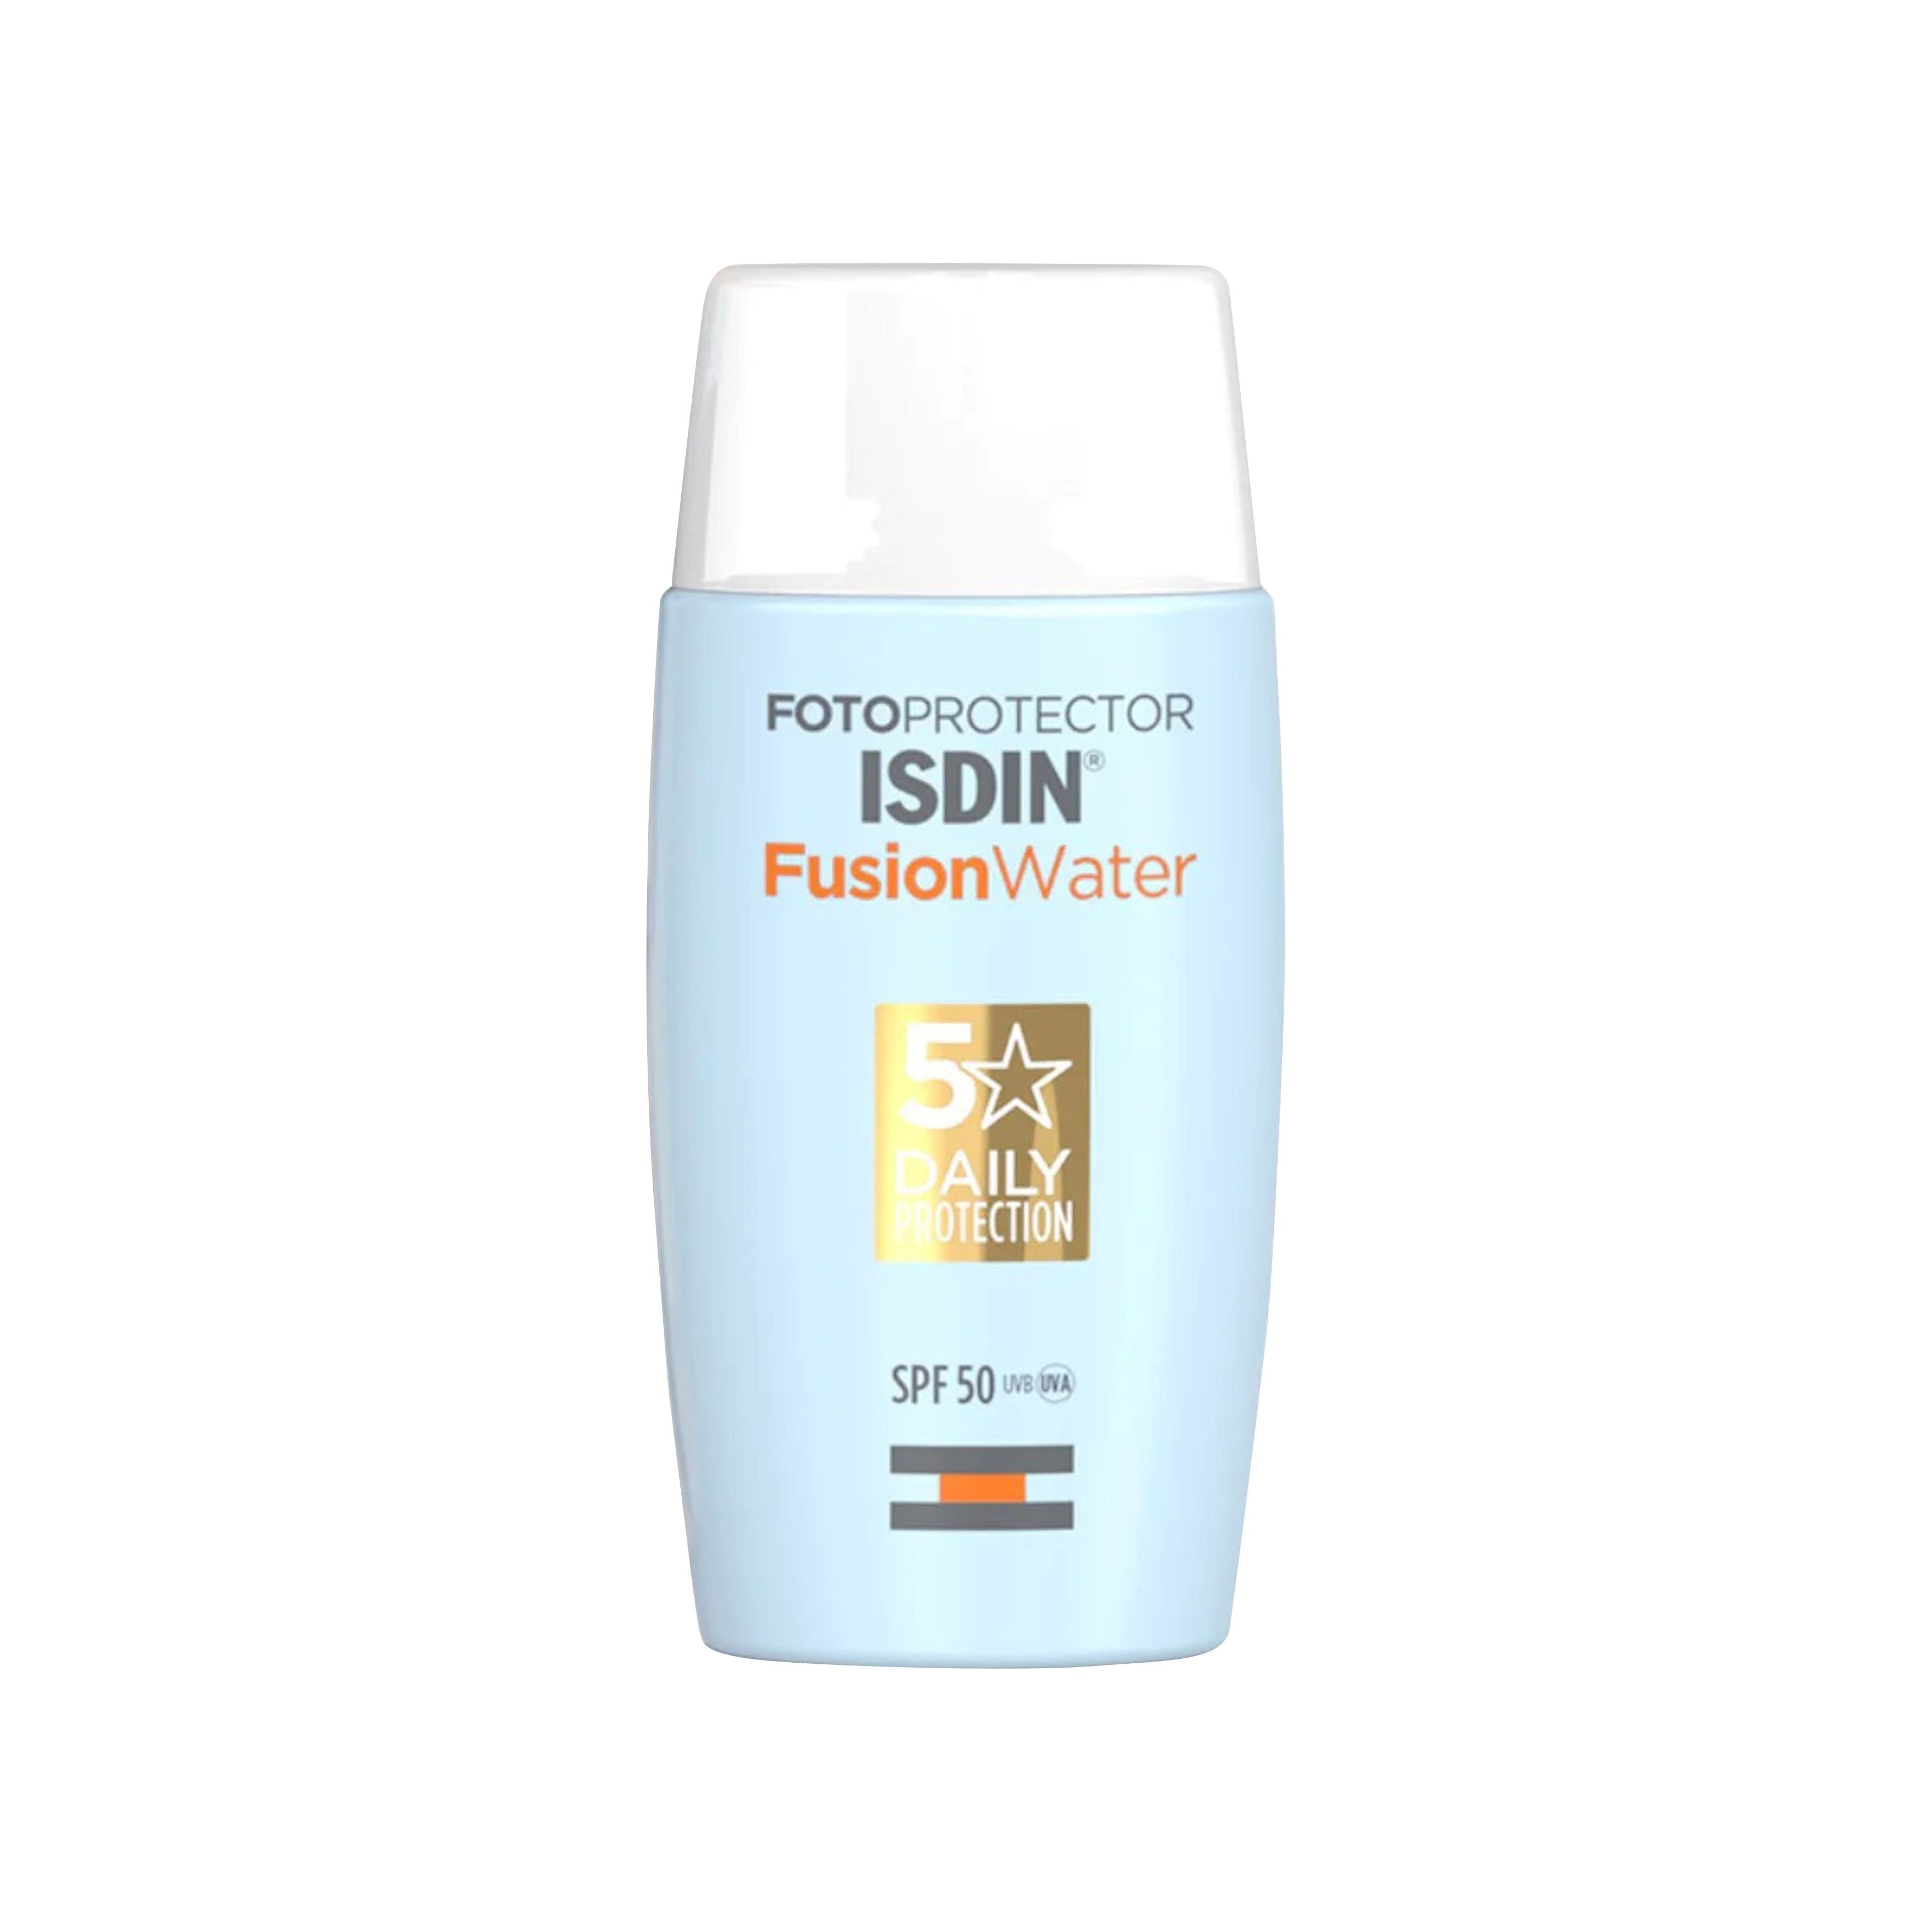 Fotoprotector Fusion Water SPF 50 | Isdin | Uperfect Perú